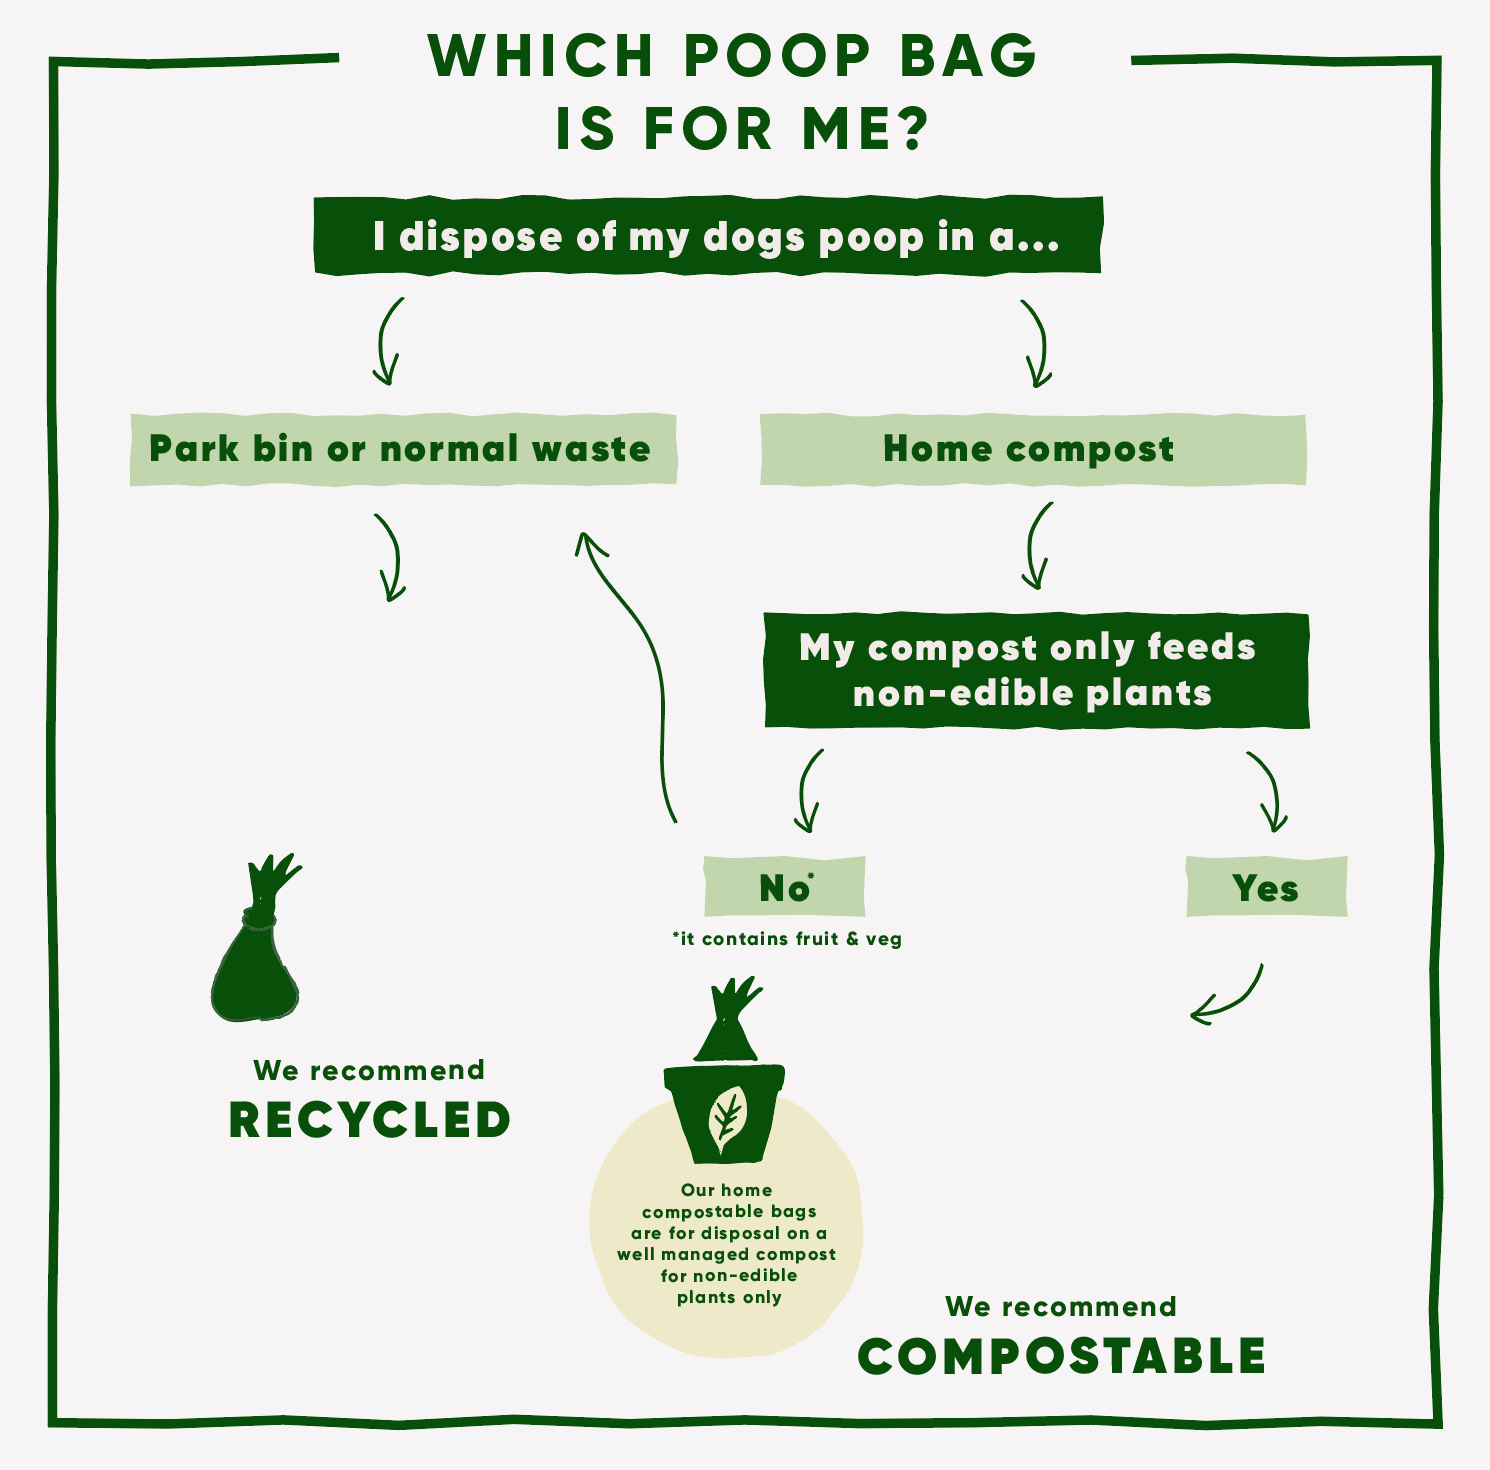 can you dipose of dog poop in waste container